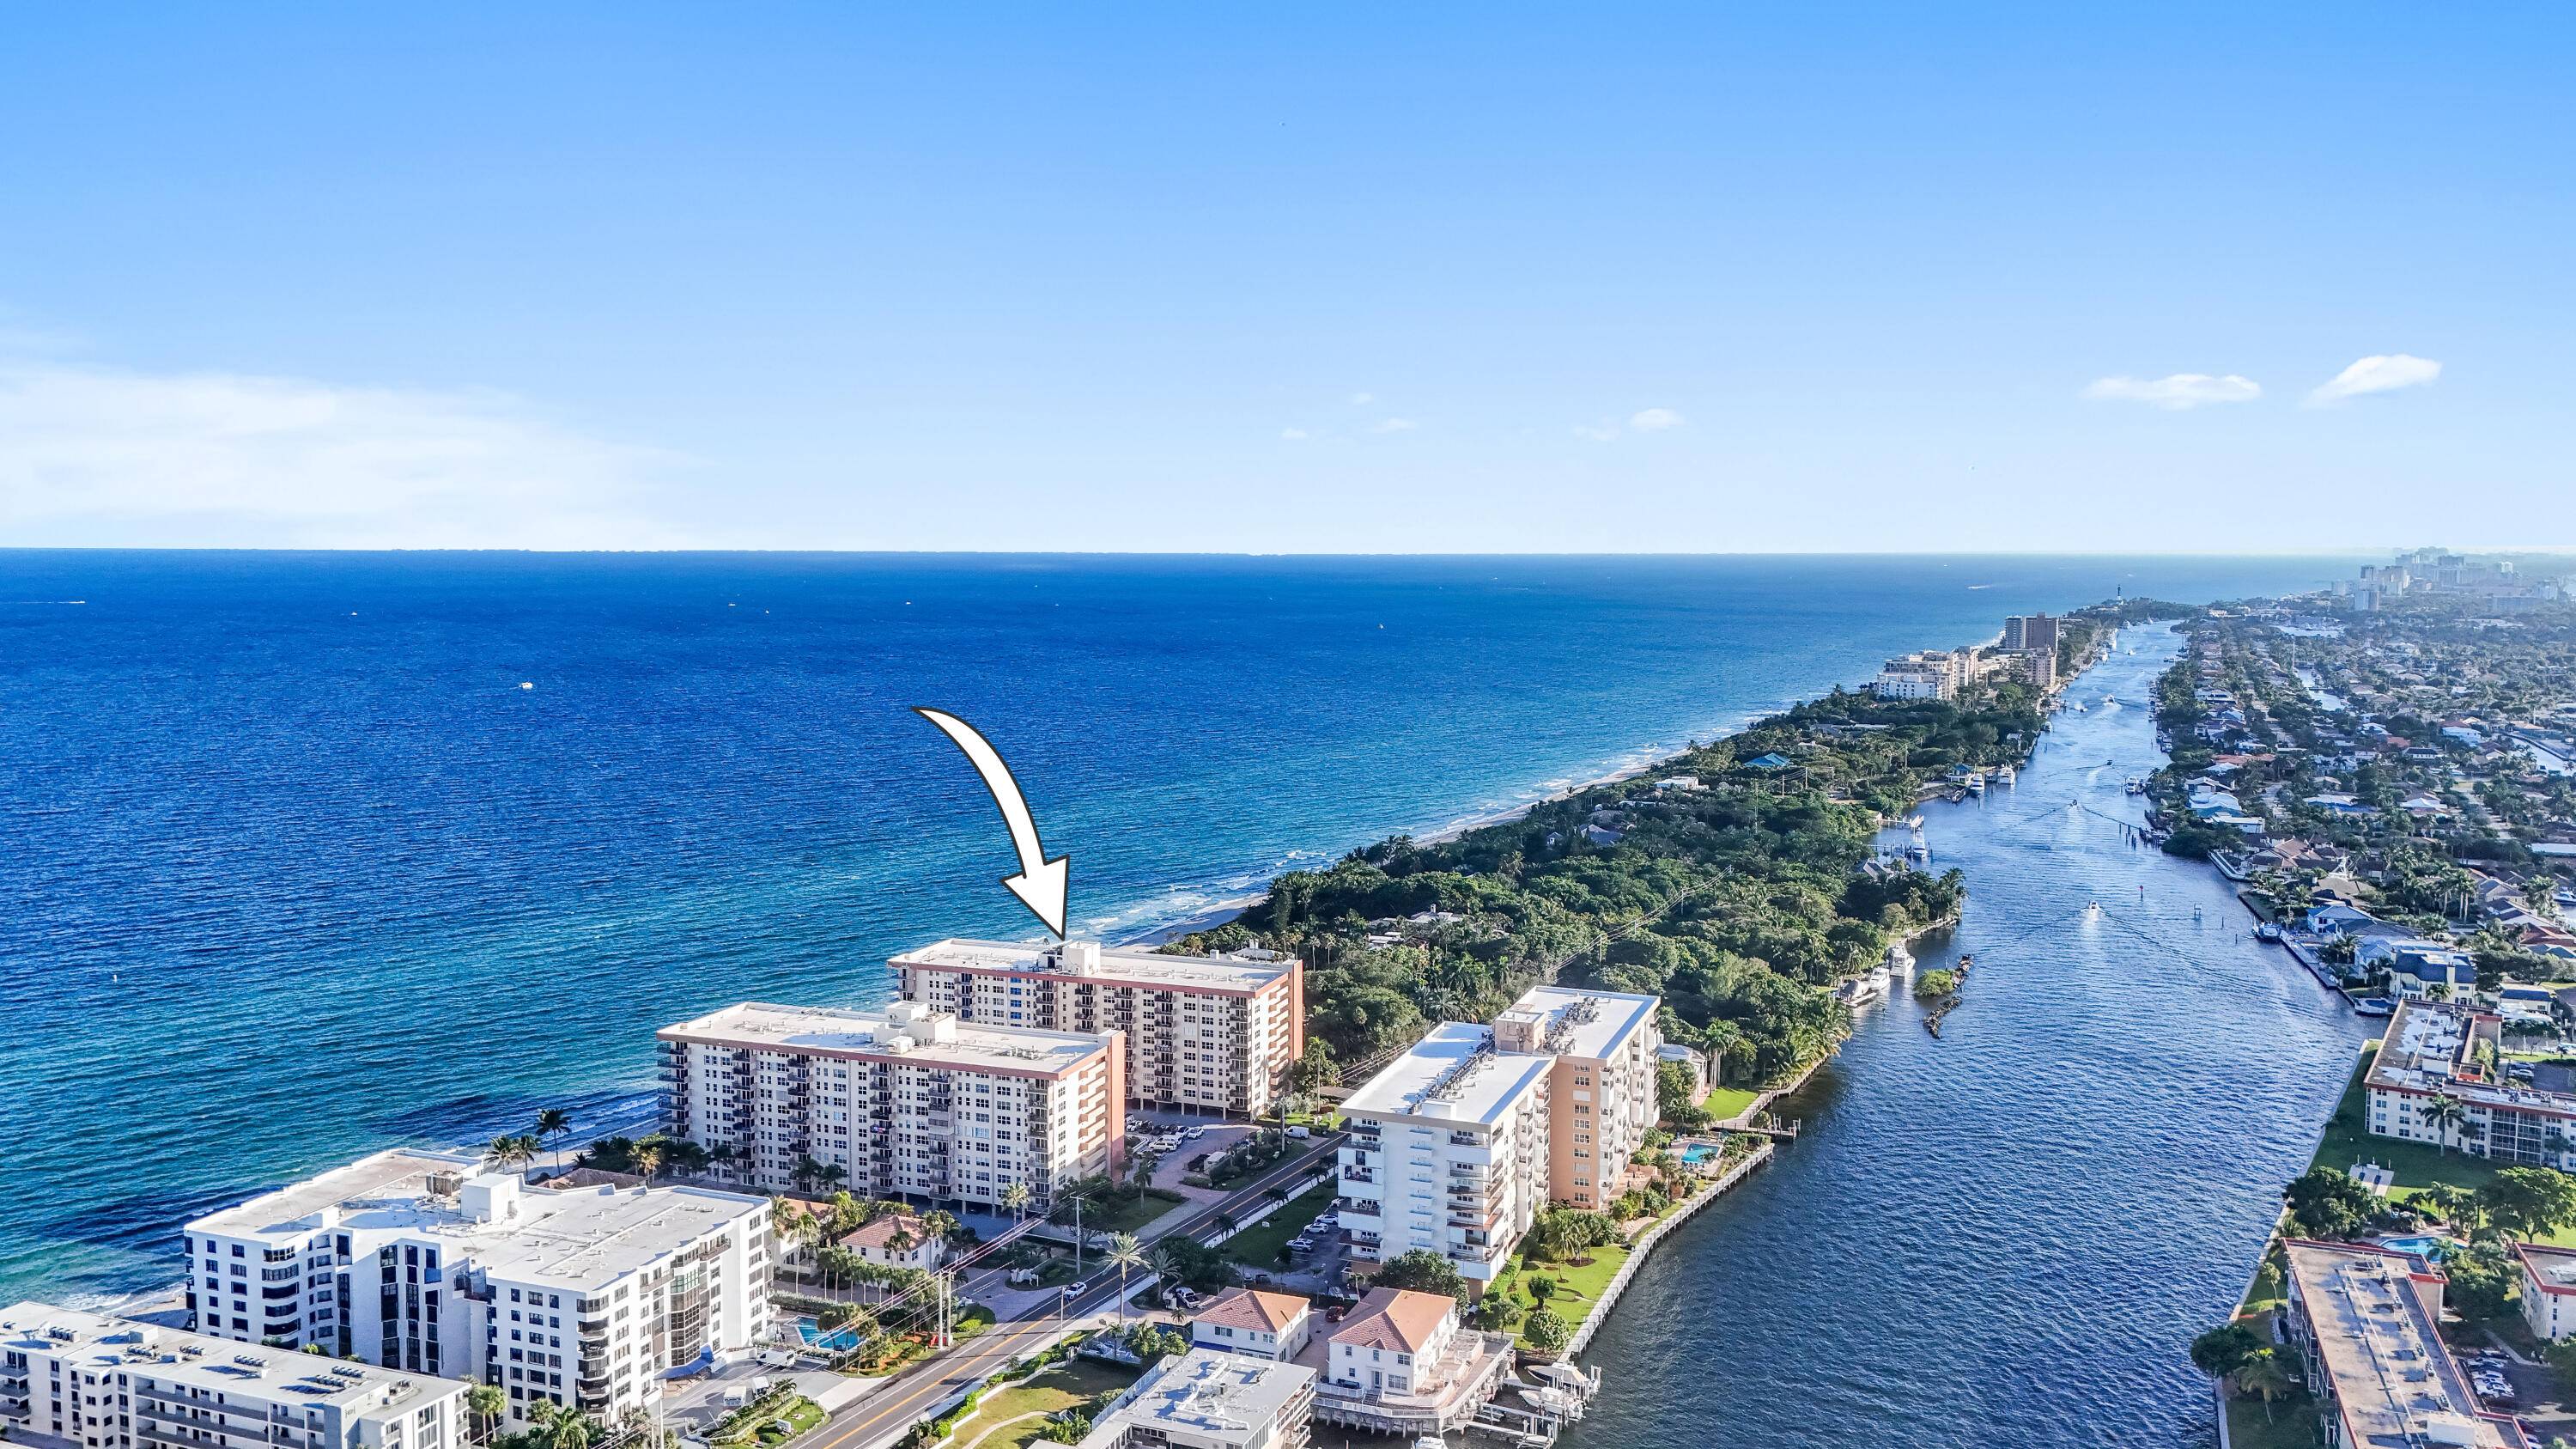 Opportunity to own a stunning oceanfront condo located in the prestigious Millionaire Mile, surrounded by magnificent multi million dollar developments and luxurious homes.